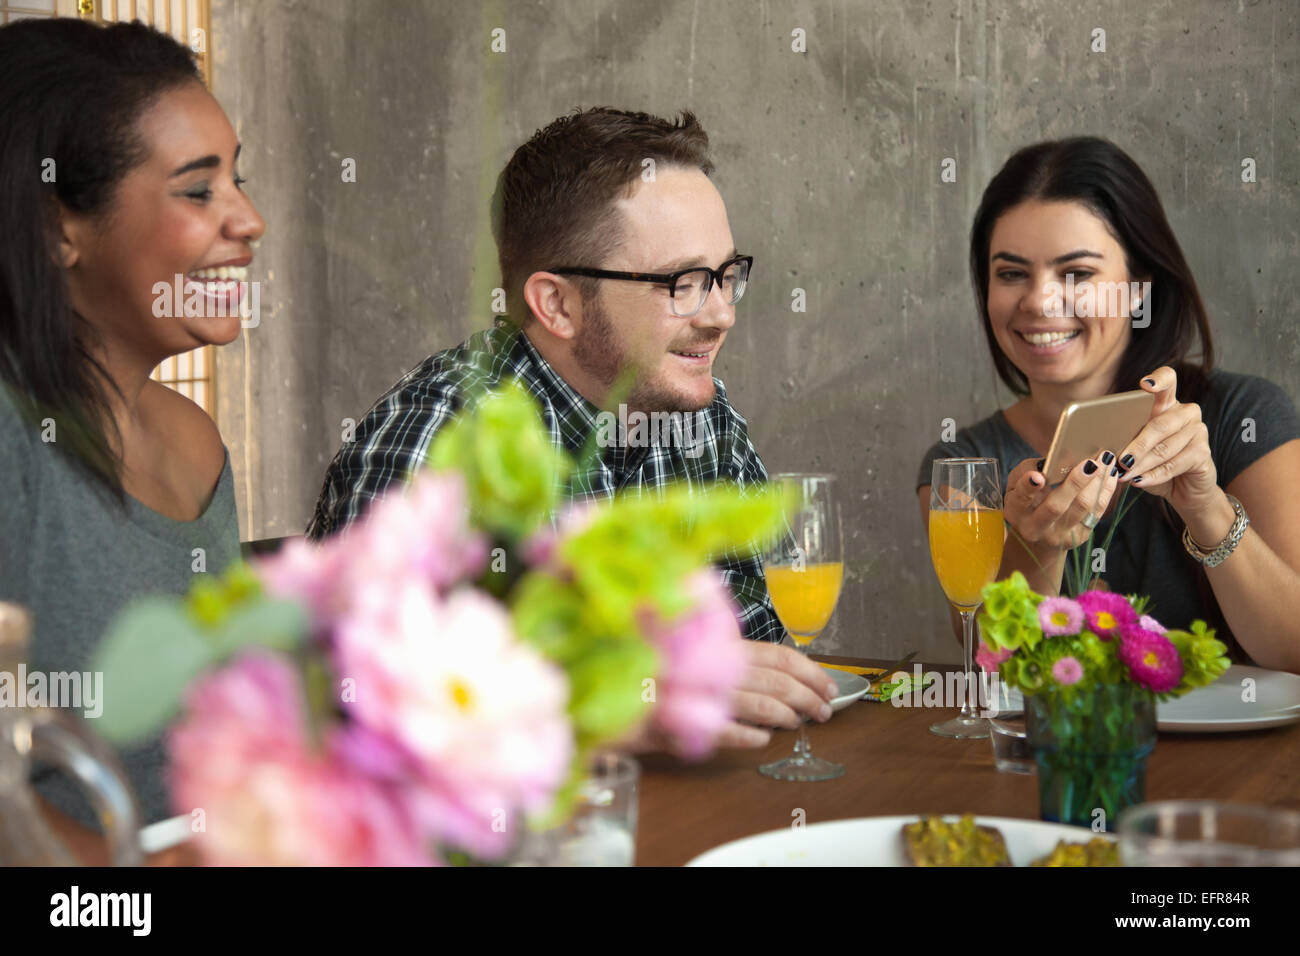 Friends at dinner table, young woman showing friend smartphone screen Stock Photo